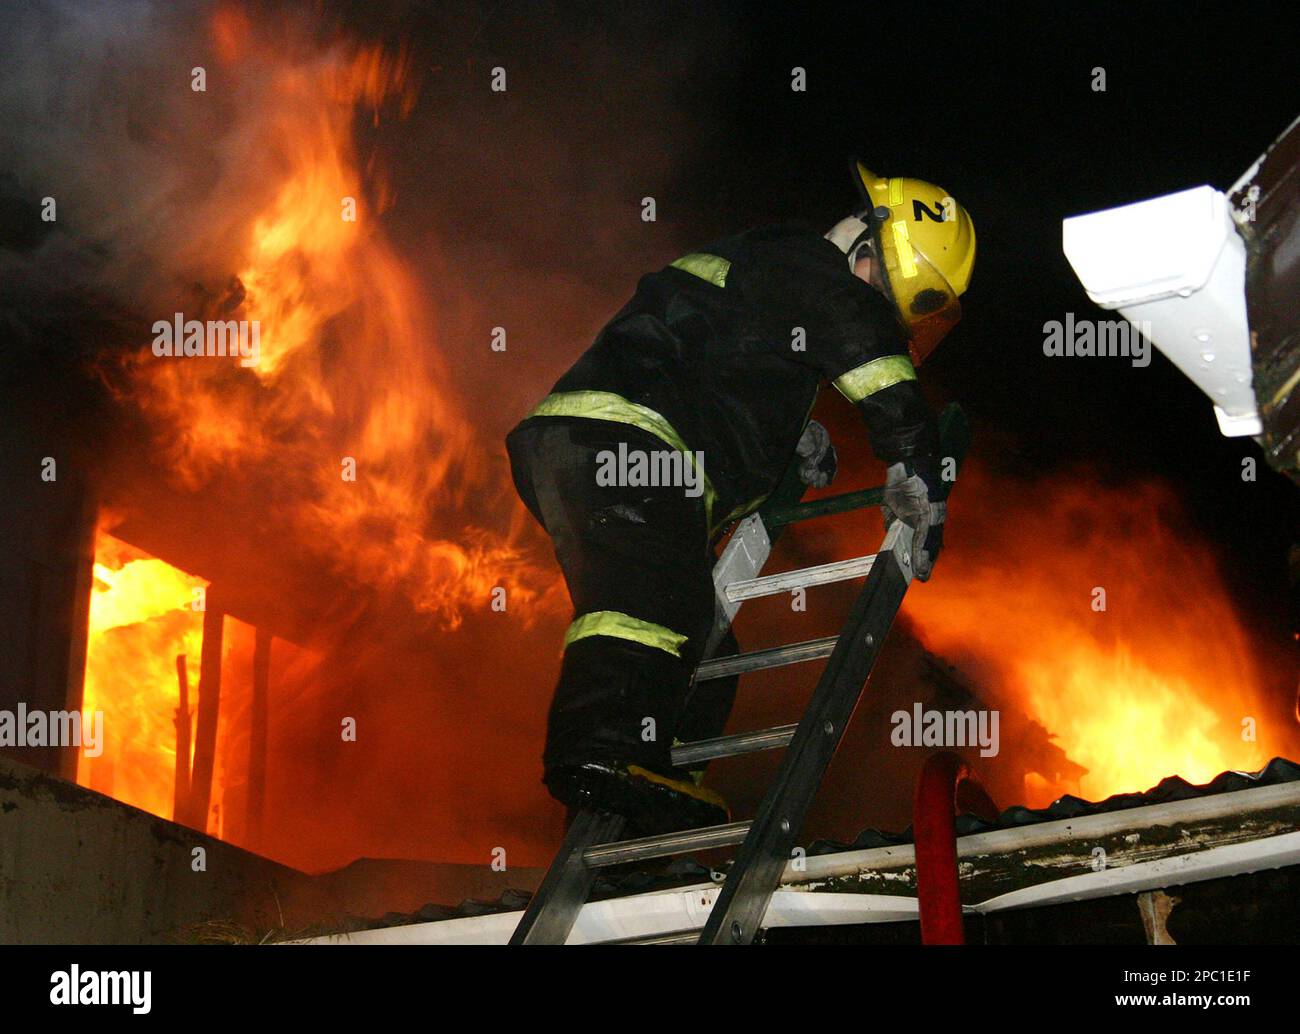 Firemen battle a blaze in the Blue House hotel in Punta Arenas, Chile,  Saturday, Feb. 3, 2007. Ten tourists from Argentina, Germany and the  Netherlands were reported dead.(AP Photo/Diario La Prensa Austral